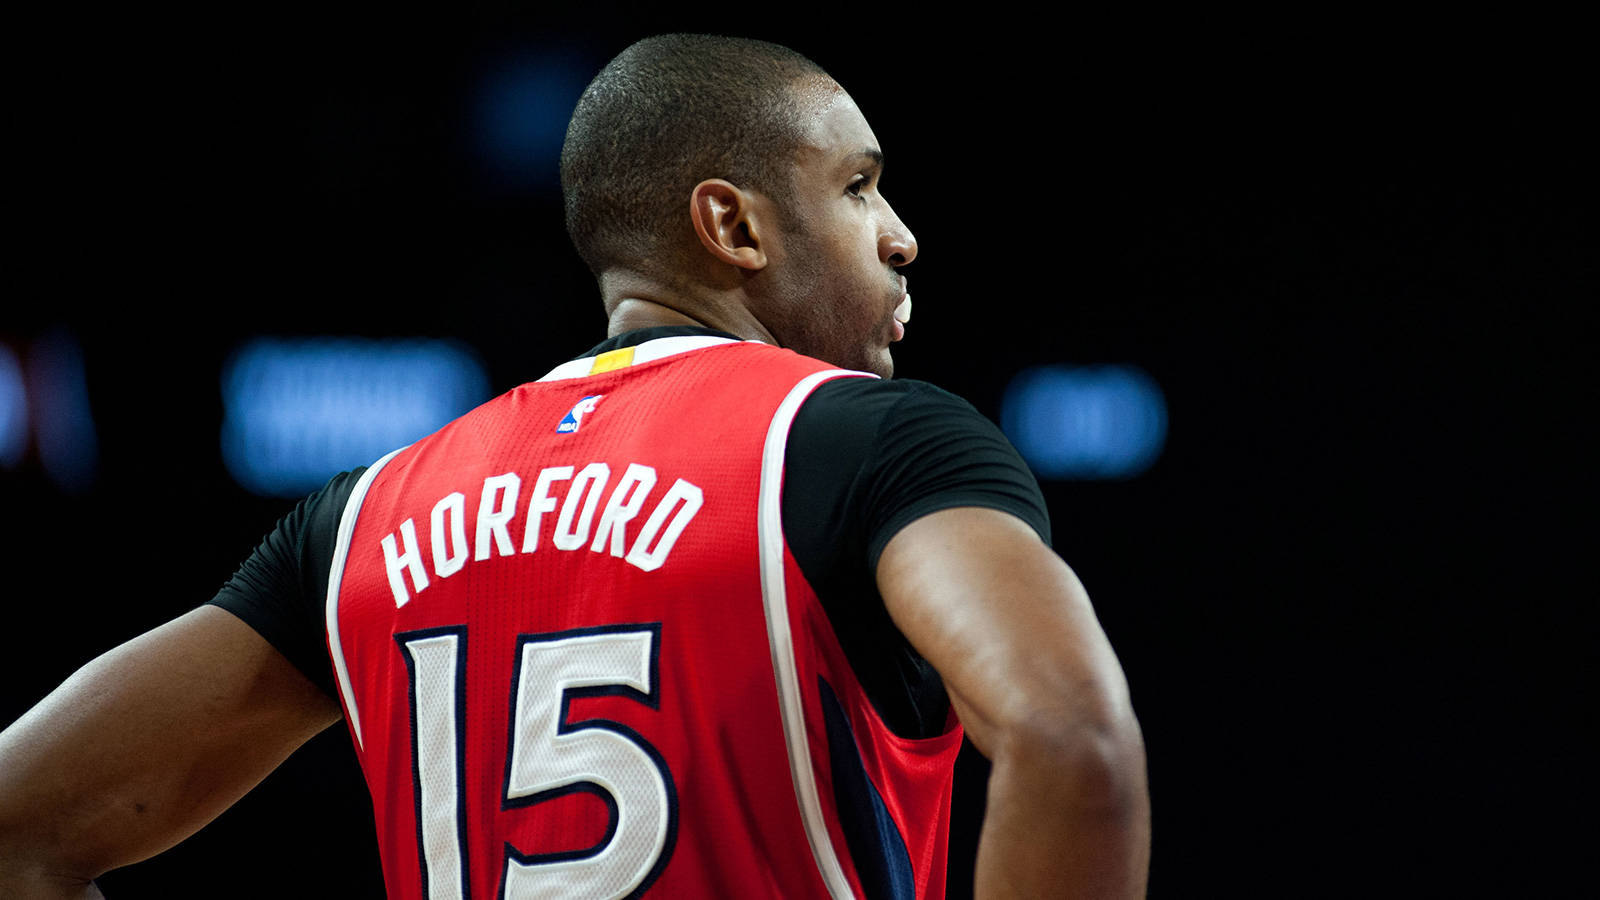 Al Horford Wears Nba Red Jersey Background